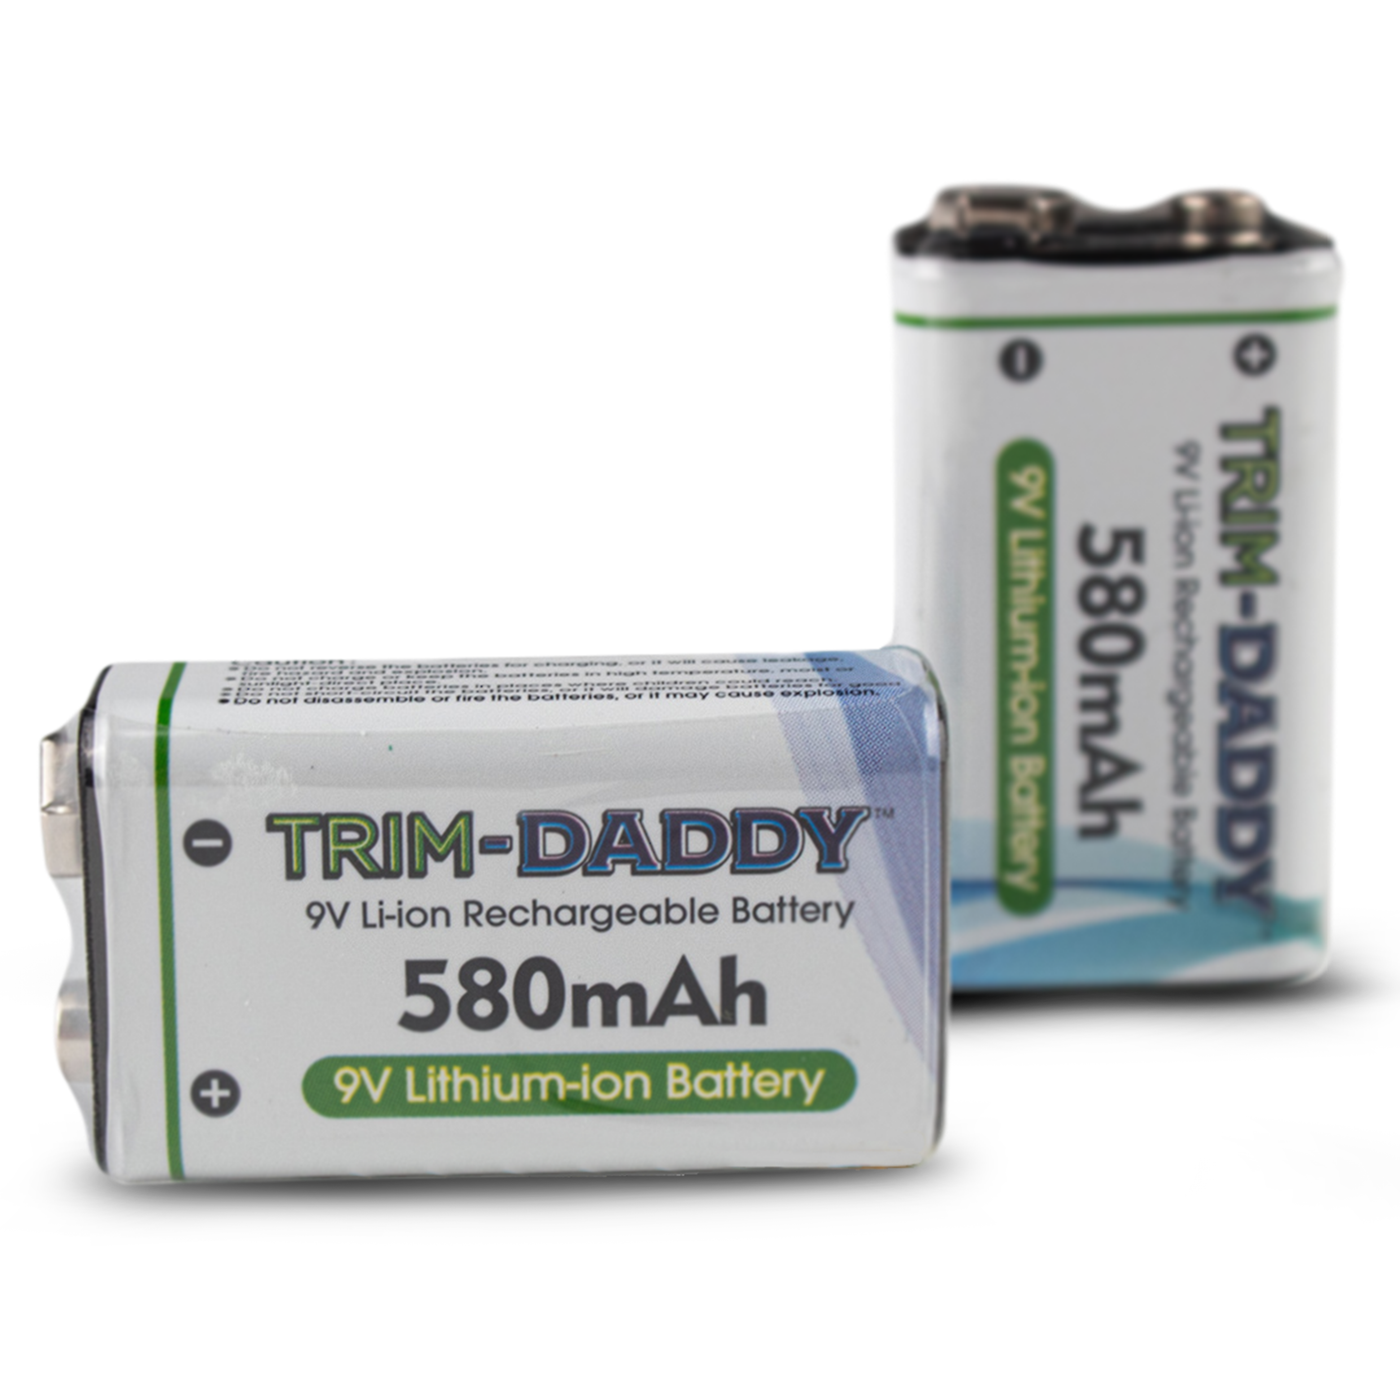 Trim-Daddy Rechargeable Lithium Ion Batteries